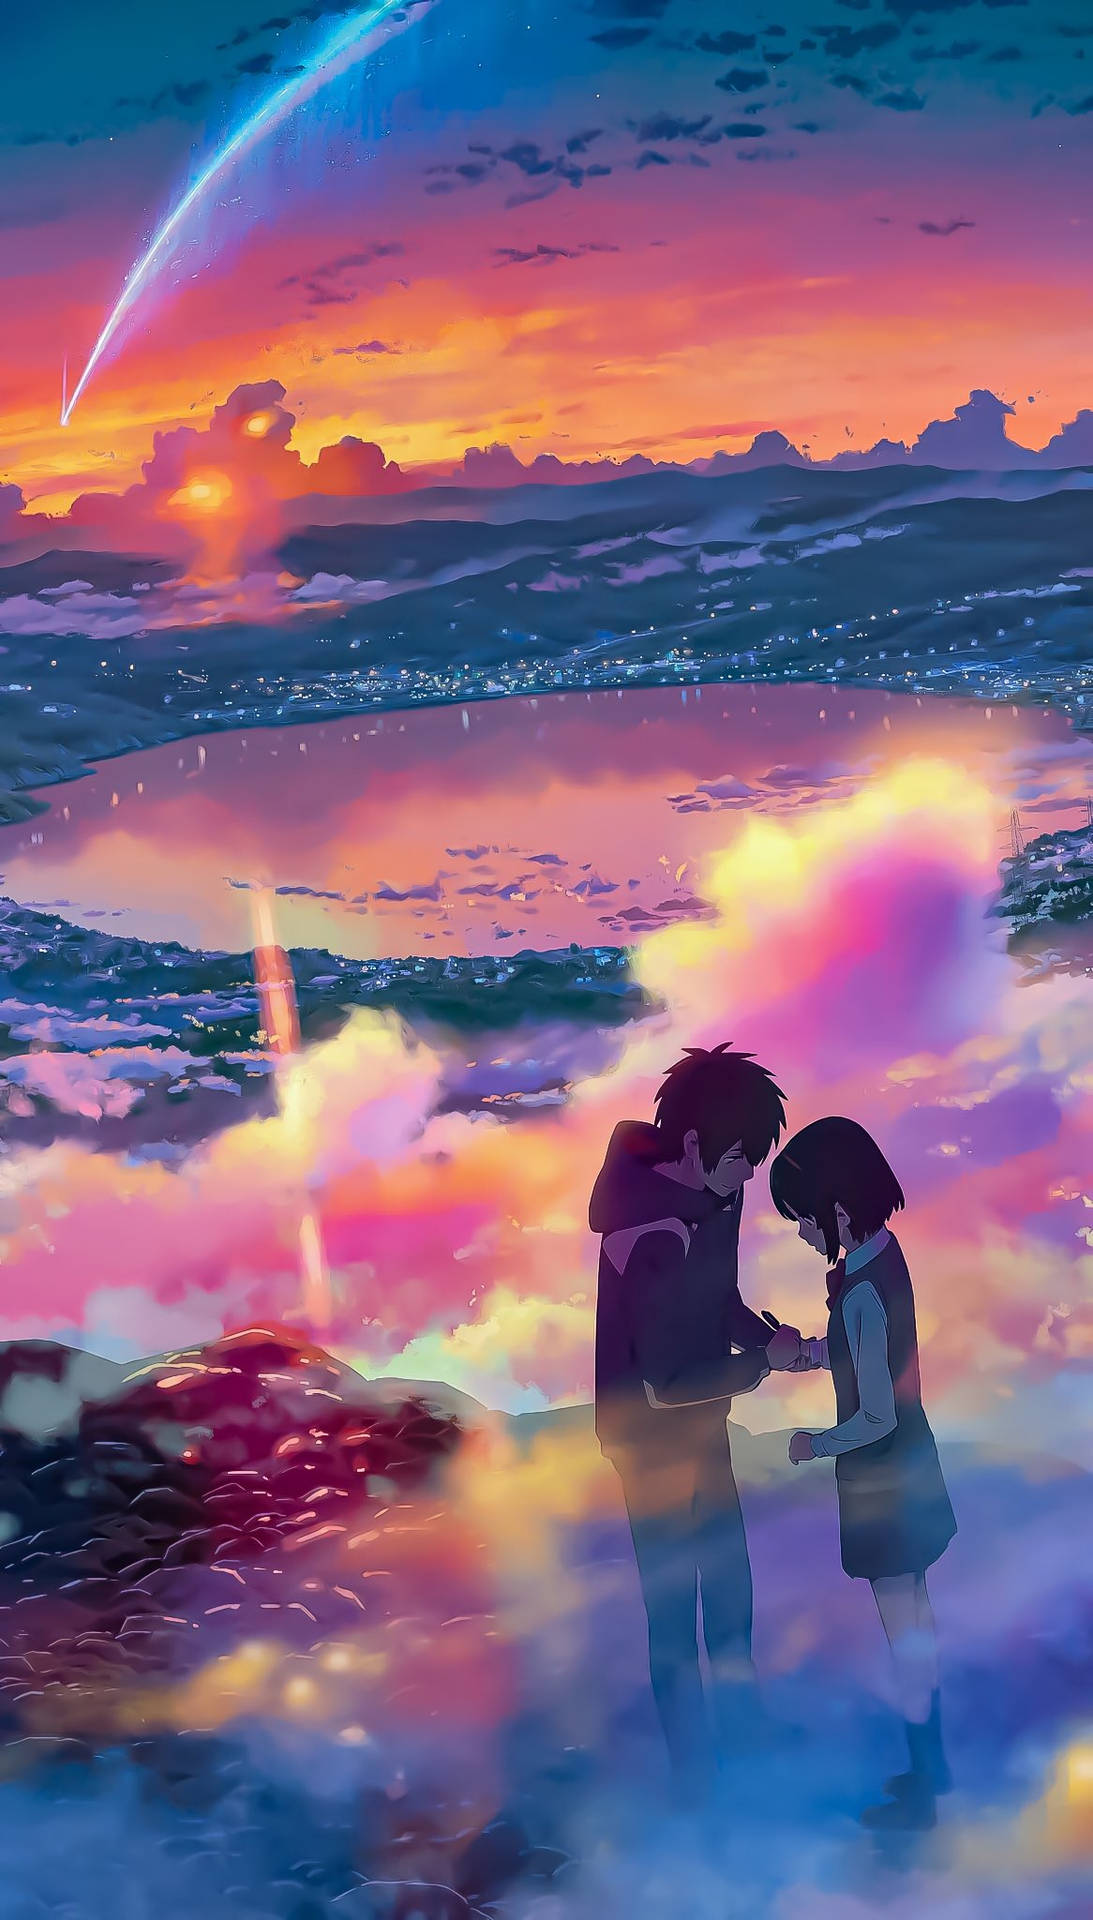 Your Name Anime Aesthetic Sunset